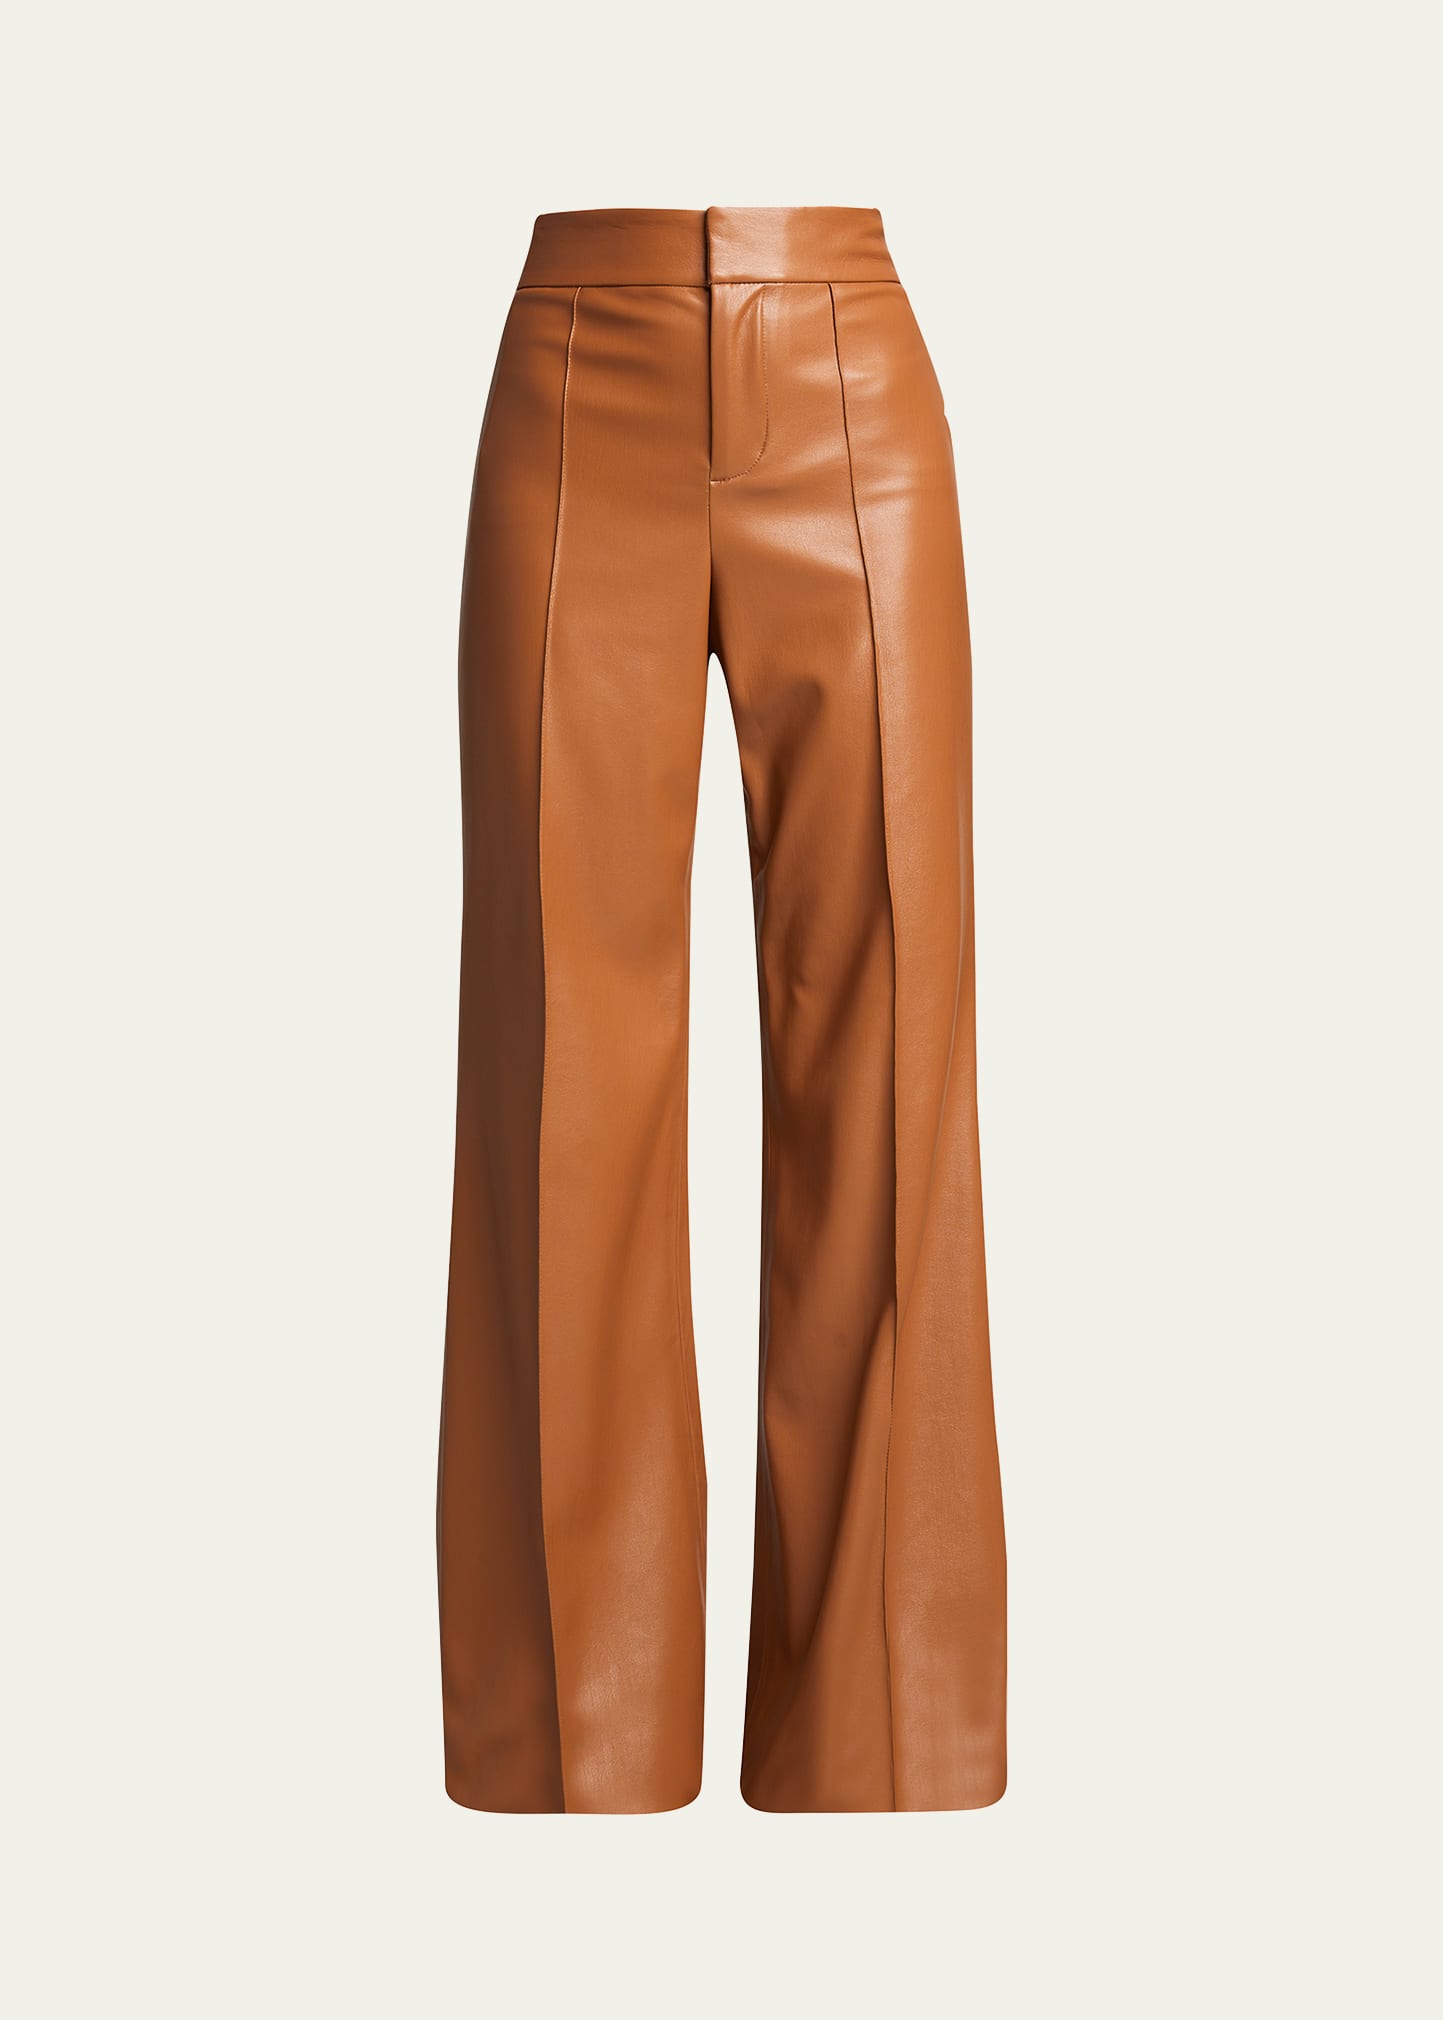 Alice + Olivia Dylan High-Waist Faux-Leather Pants | Bergdorf Goodman